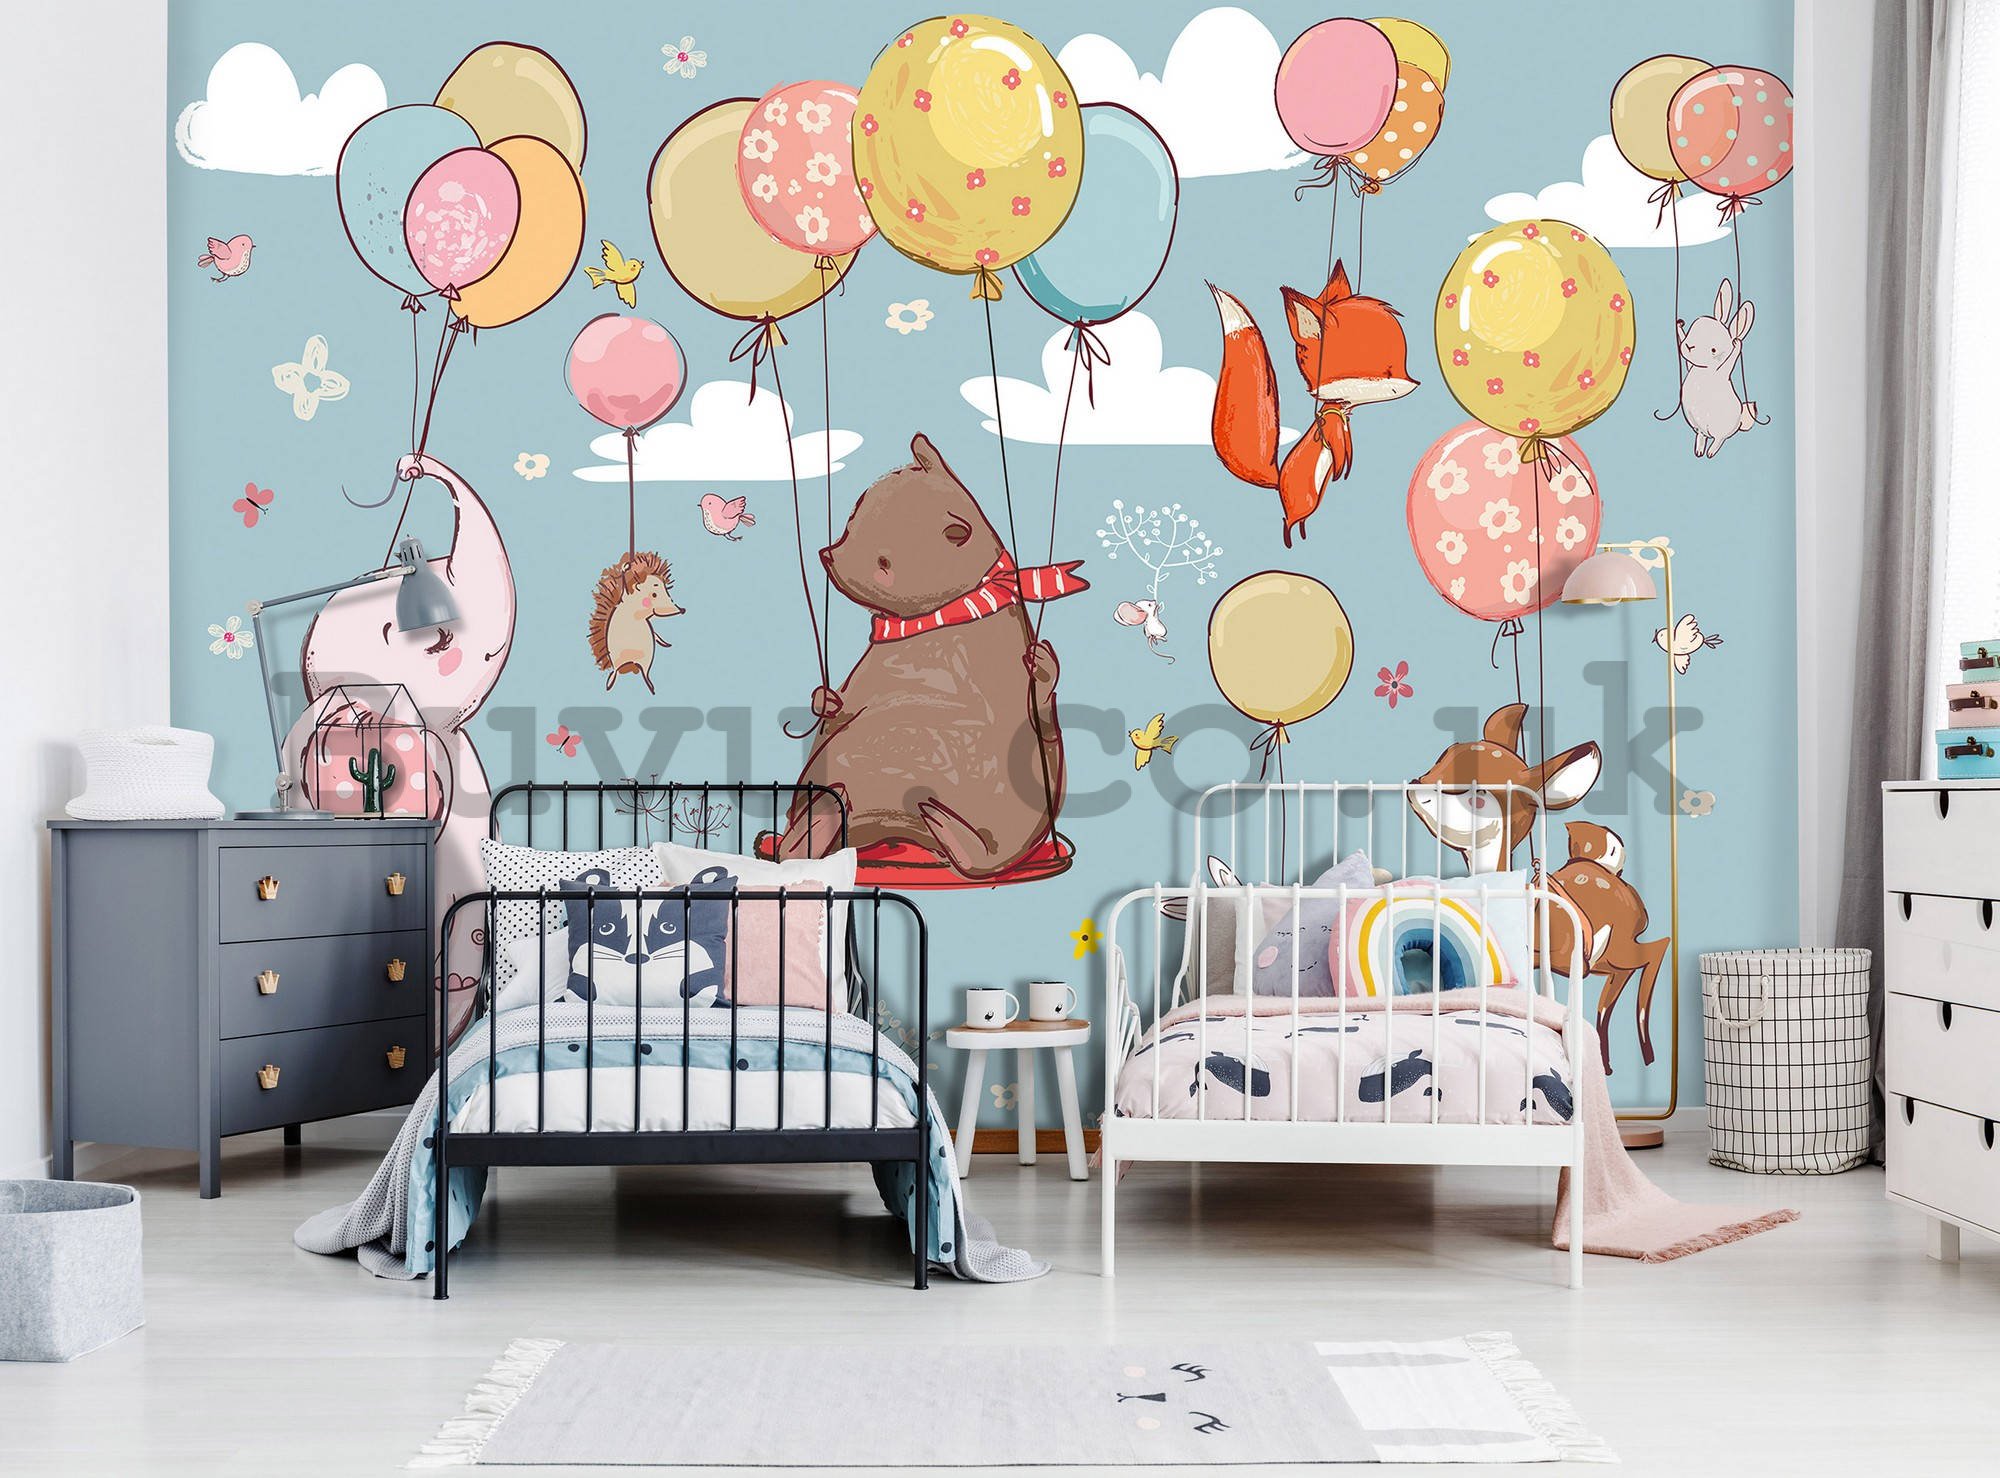 Wall mural vlies: Animals in the clouds - 416x254 cm